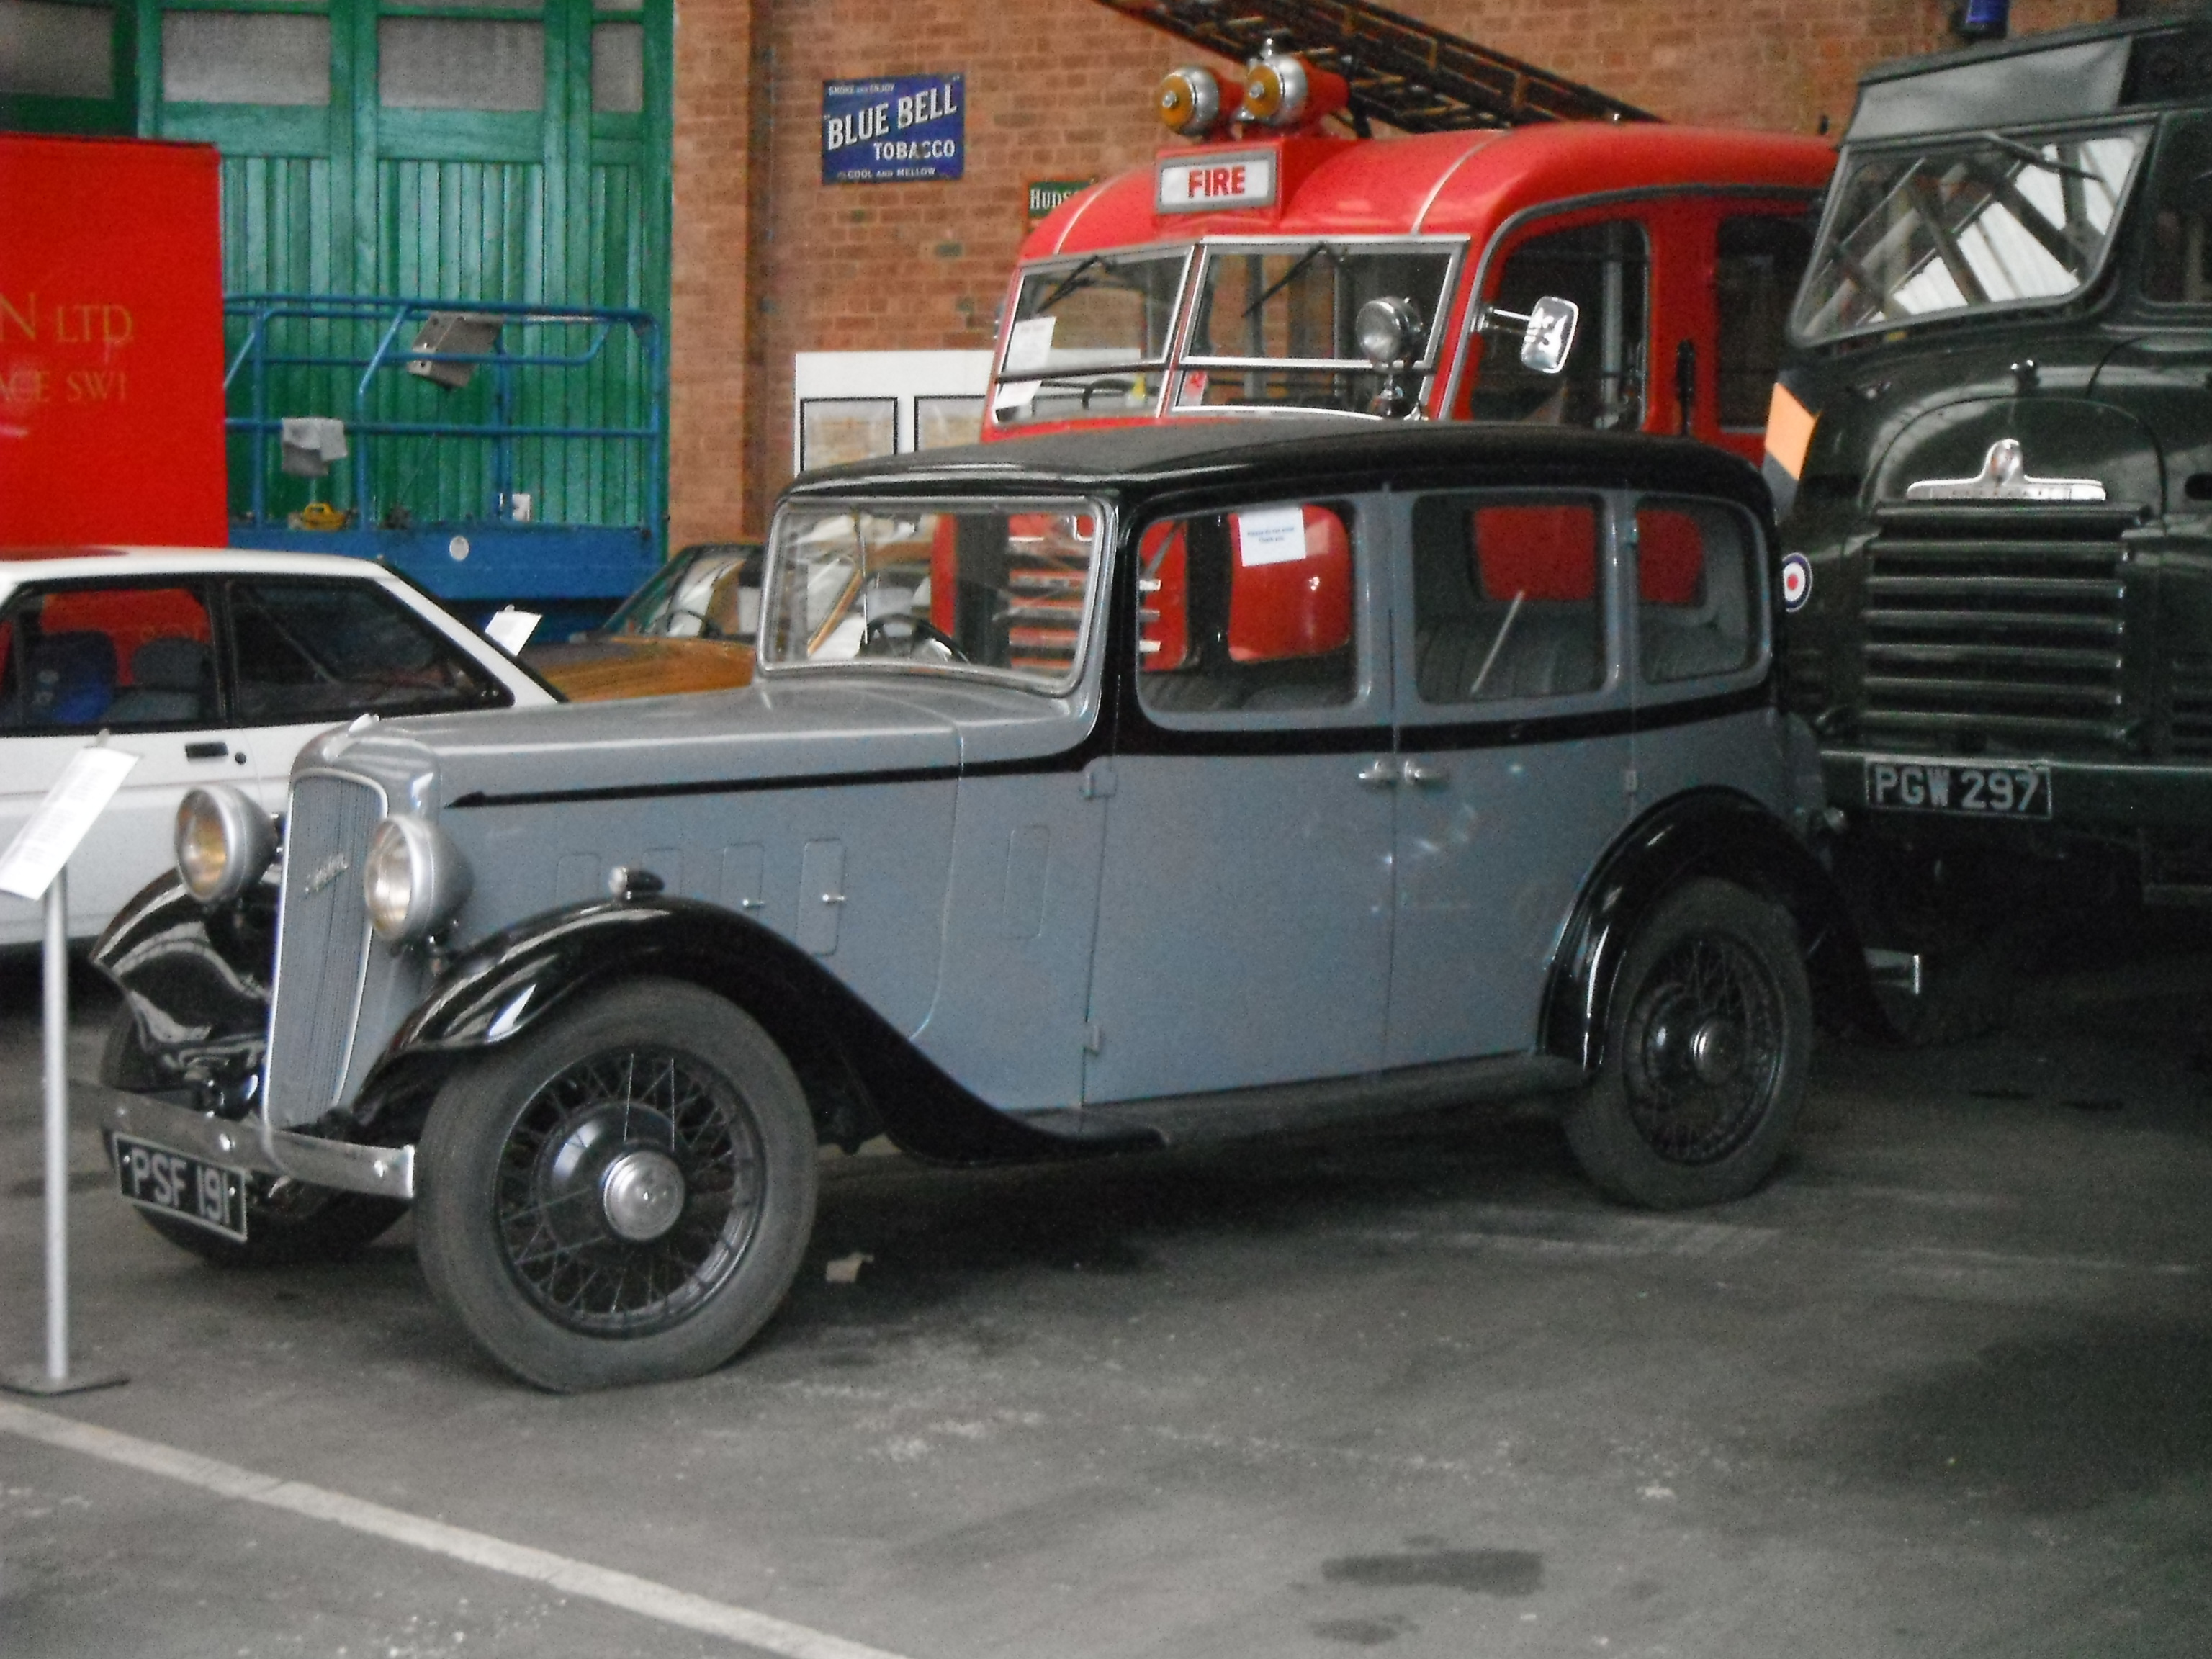 Photo taken by me – vehicels at the St Helens Transport Museum 